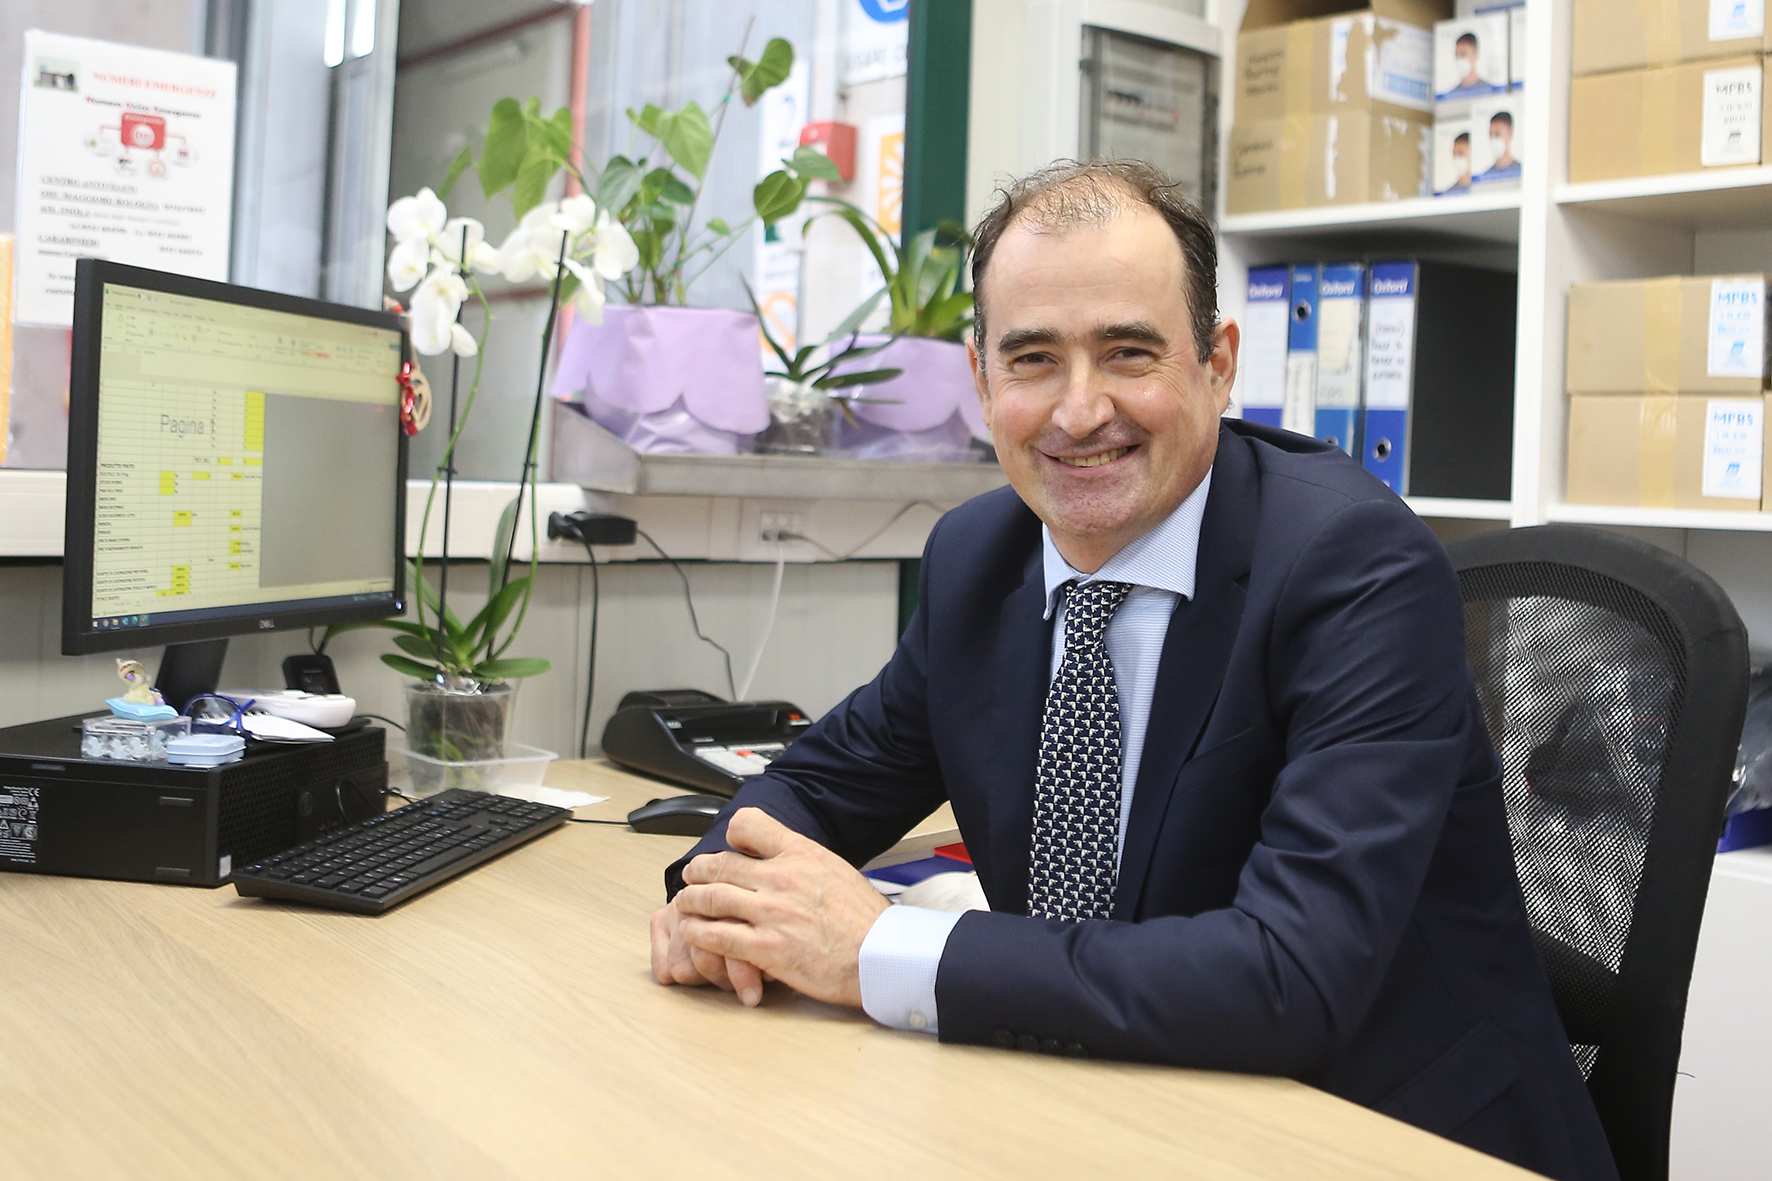 Mario Marino is the new director of Agrimola